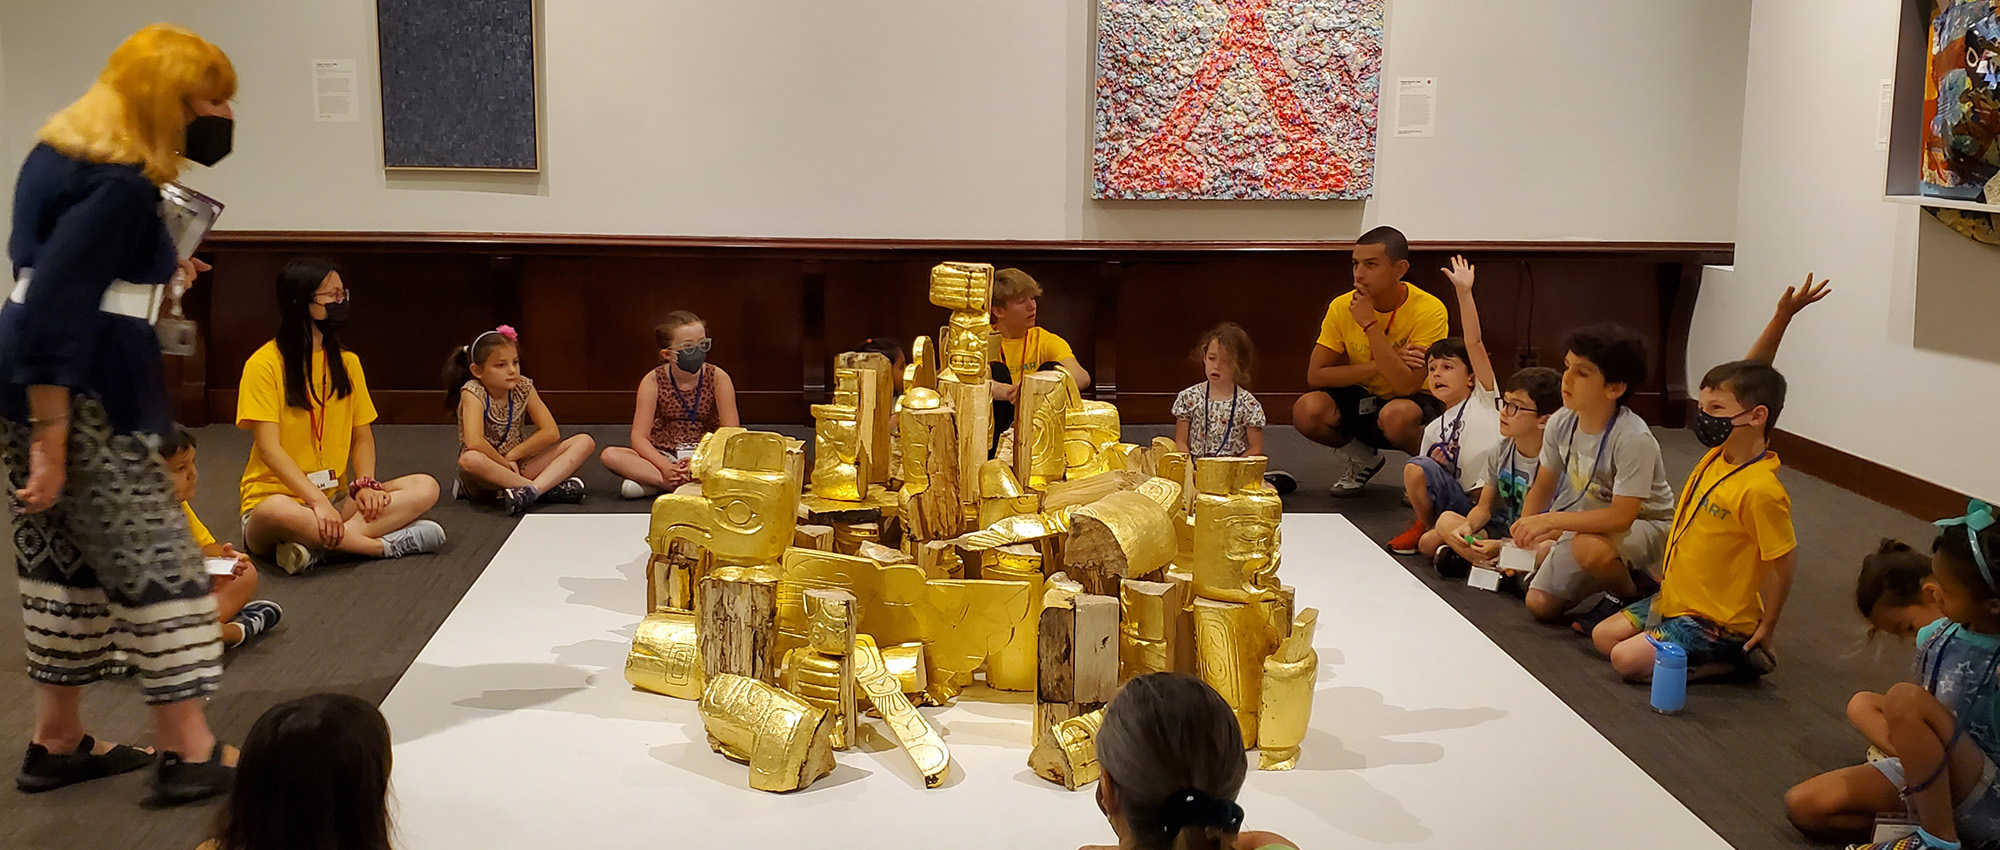 SummerArt 2022 Kid Tour Group in MAM's exhibition, "Transformed: Objects Reimagined by American Artists"